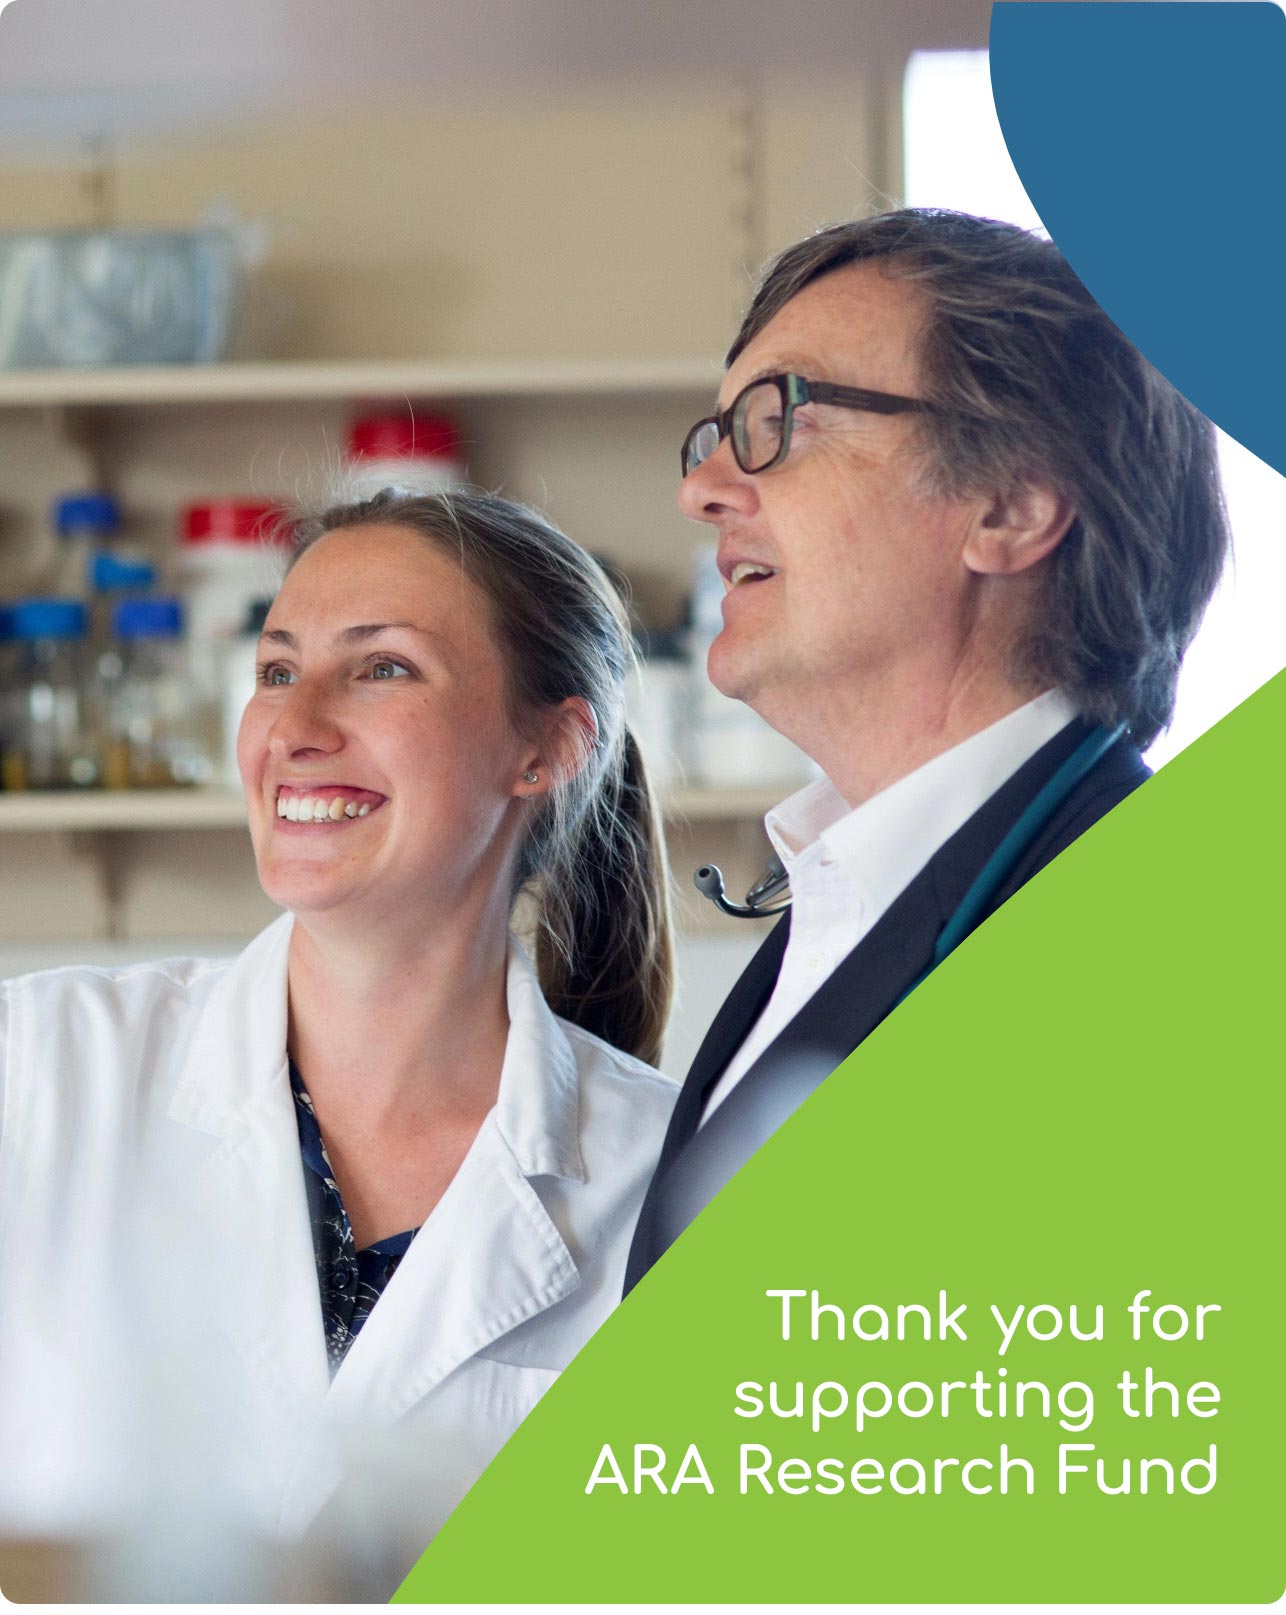 Thank you for supporting the ARA Research Fund